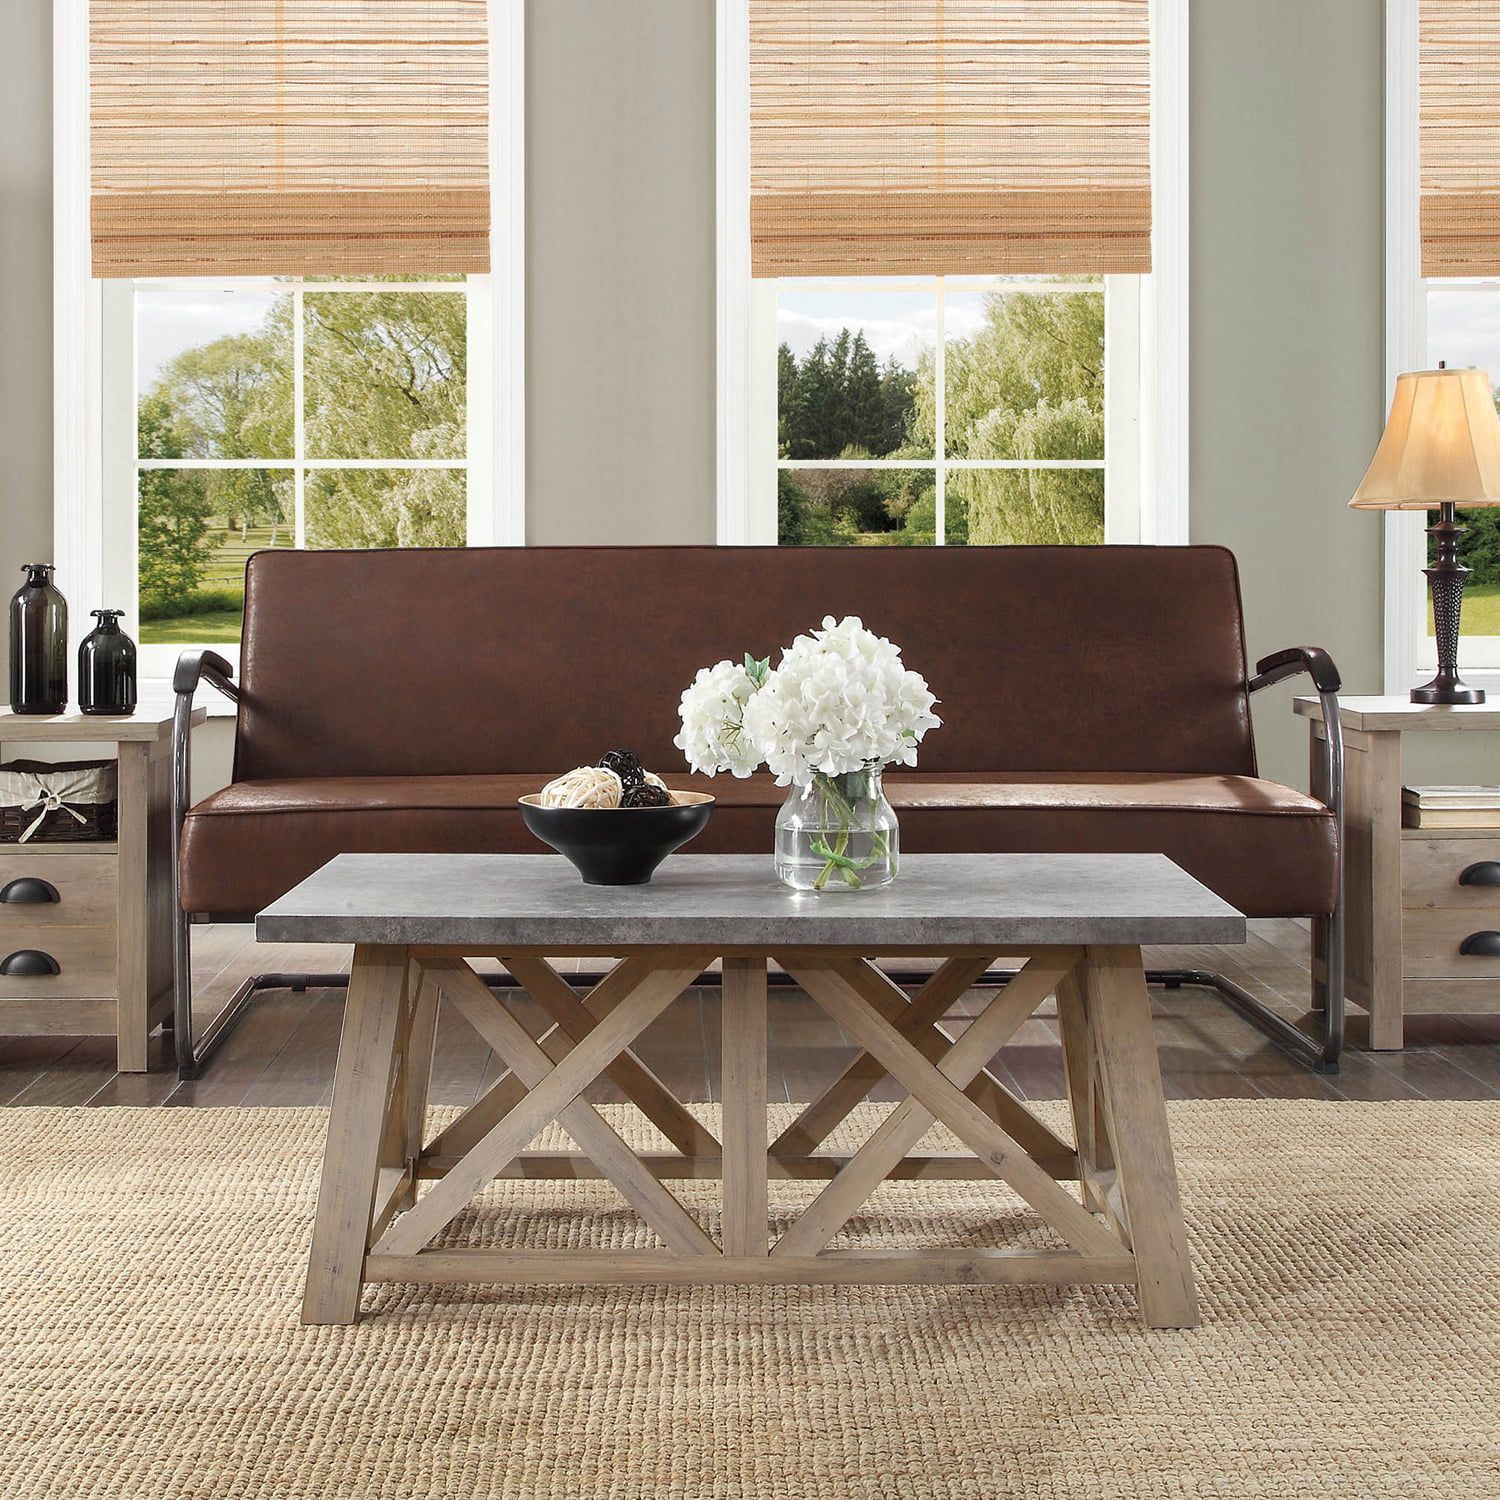 Better Homes & Gardens Modern Farmhouse Lift Top Coffee Table, Rustic With Regard To Farmhouse Lift Top Tables (View 12 of 15)